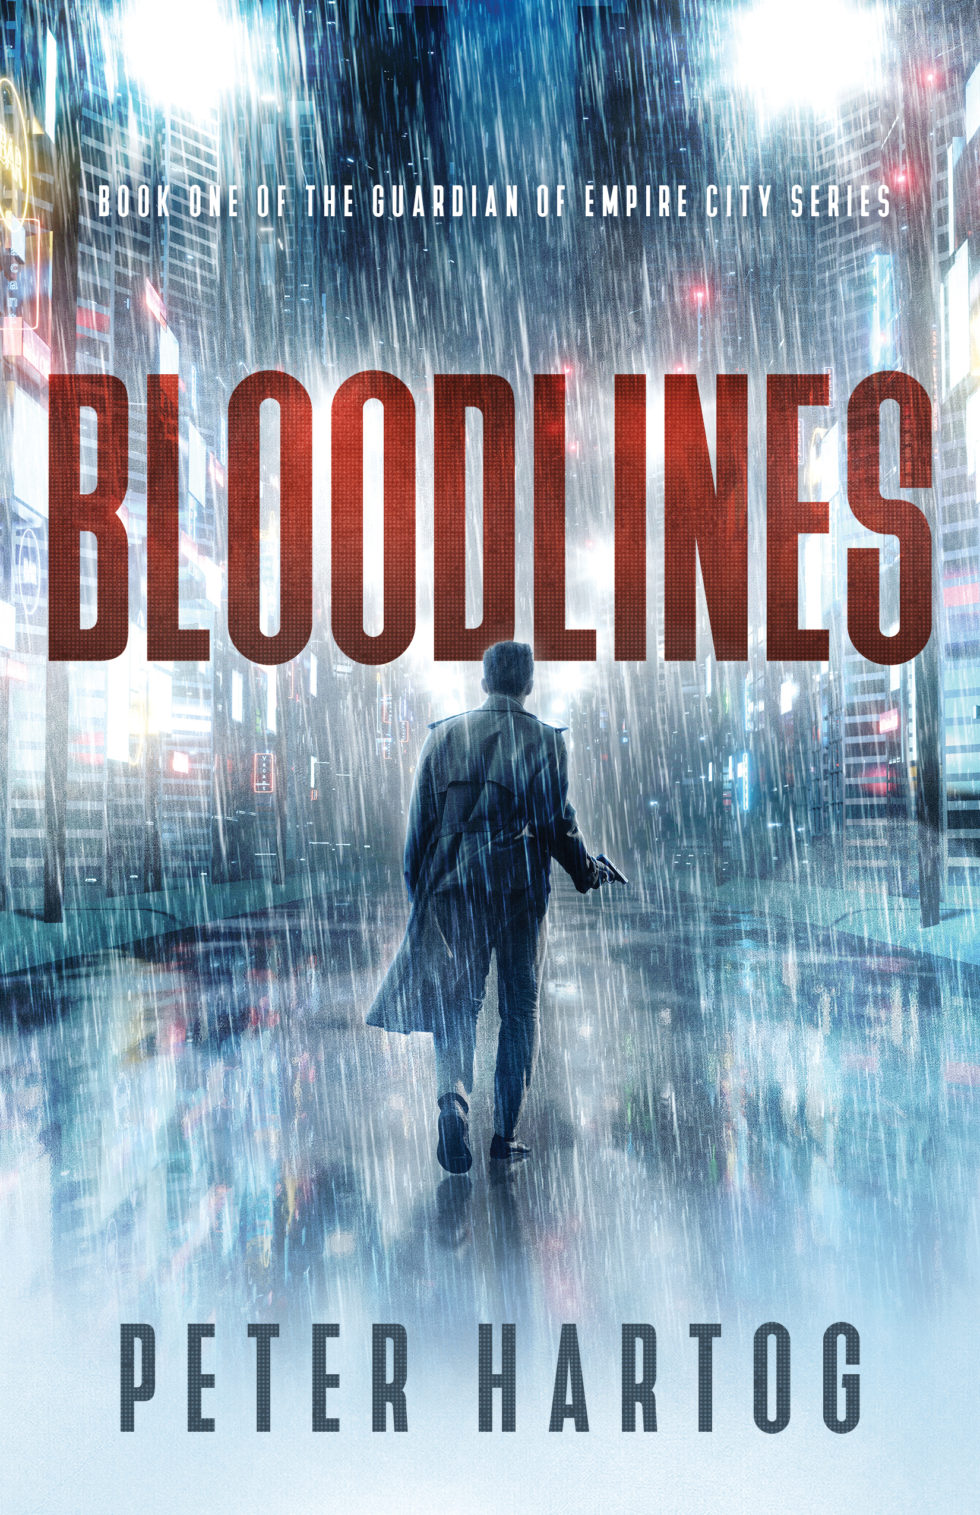 Bloodlines (Book 1 of The Guardian of Empire City Series)